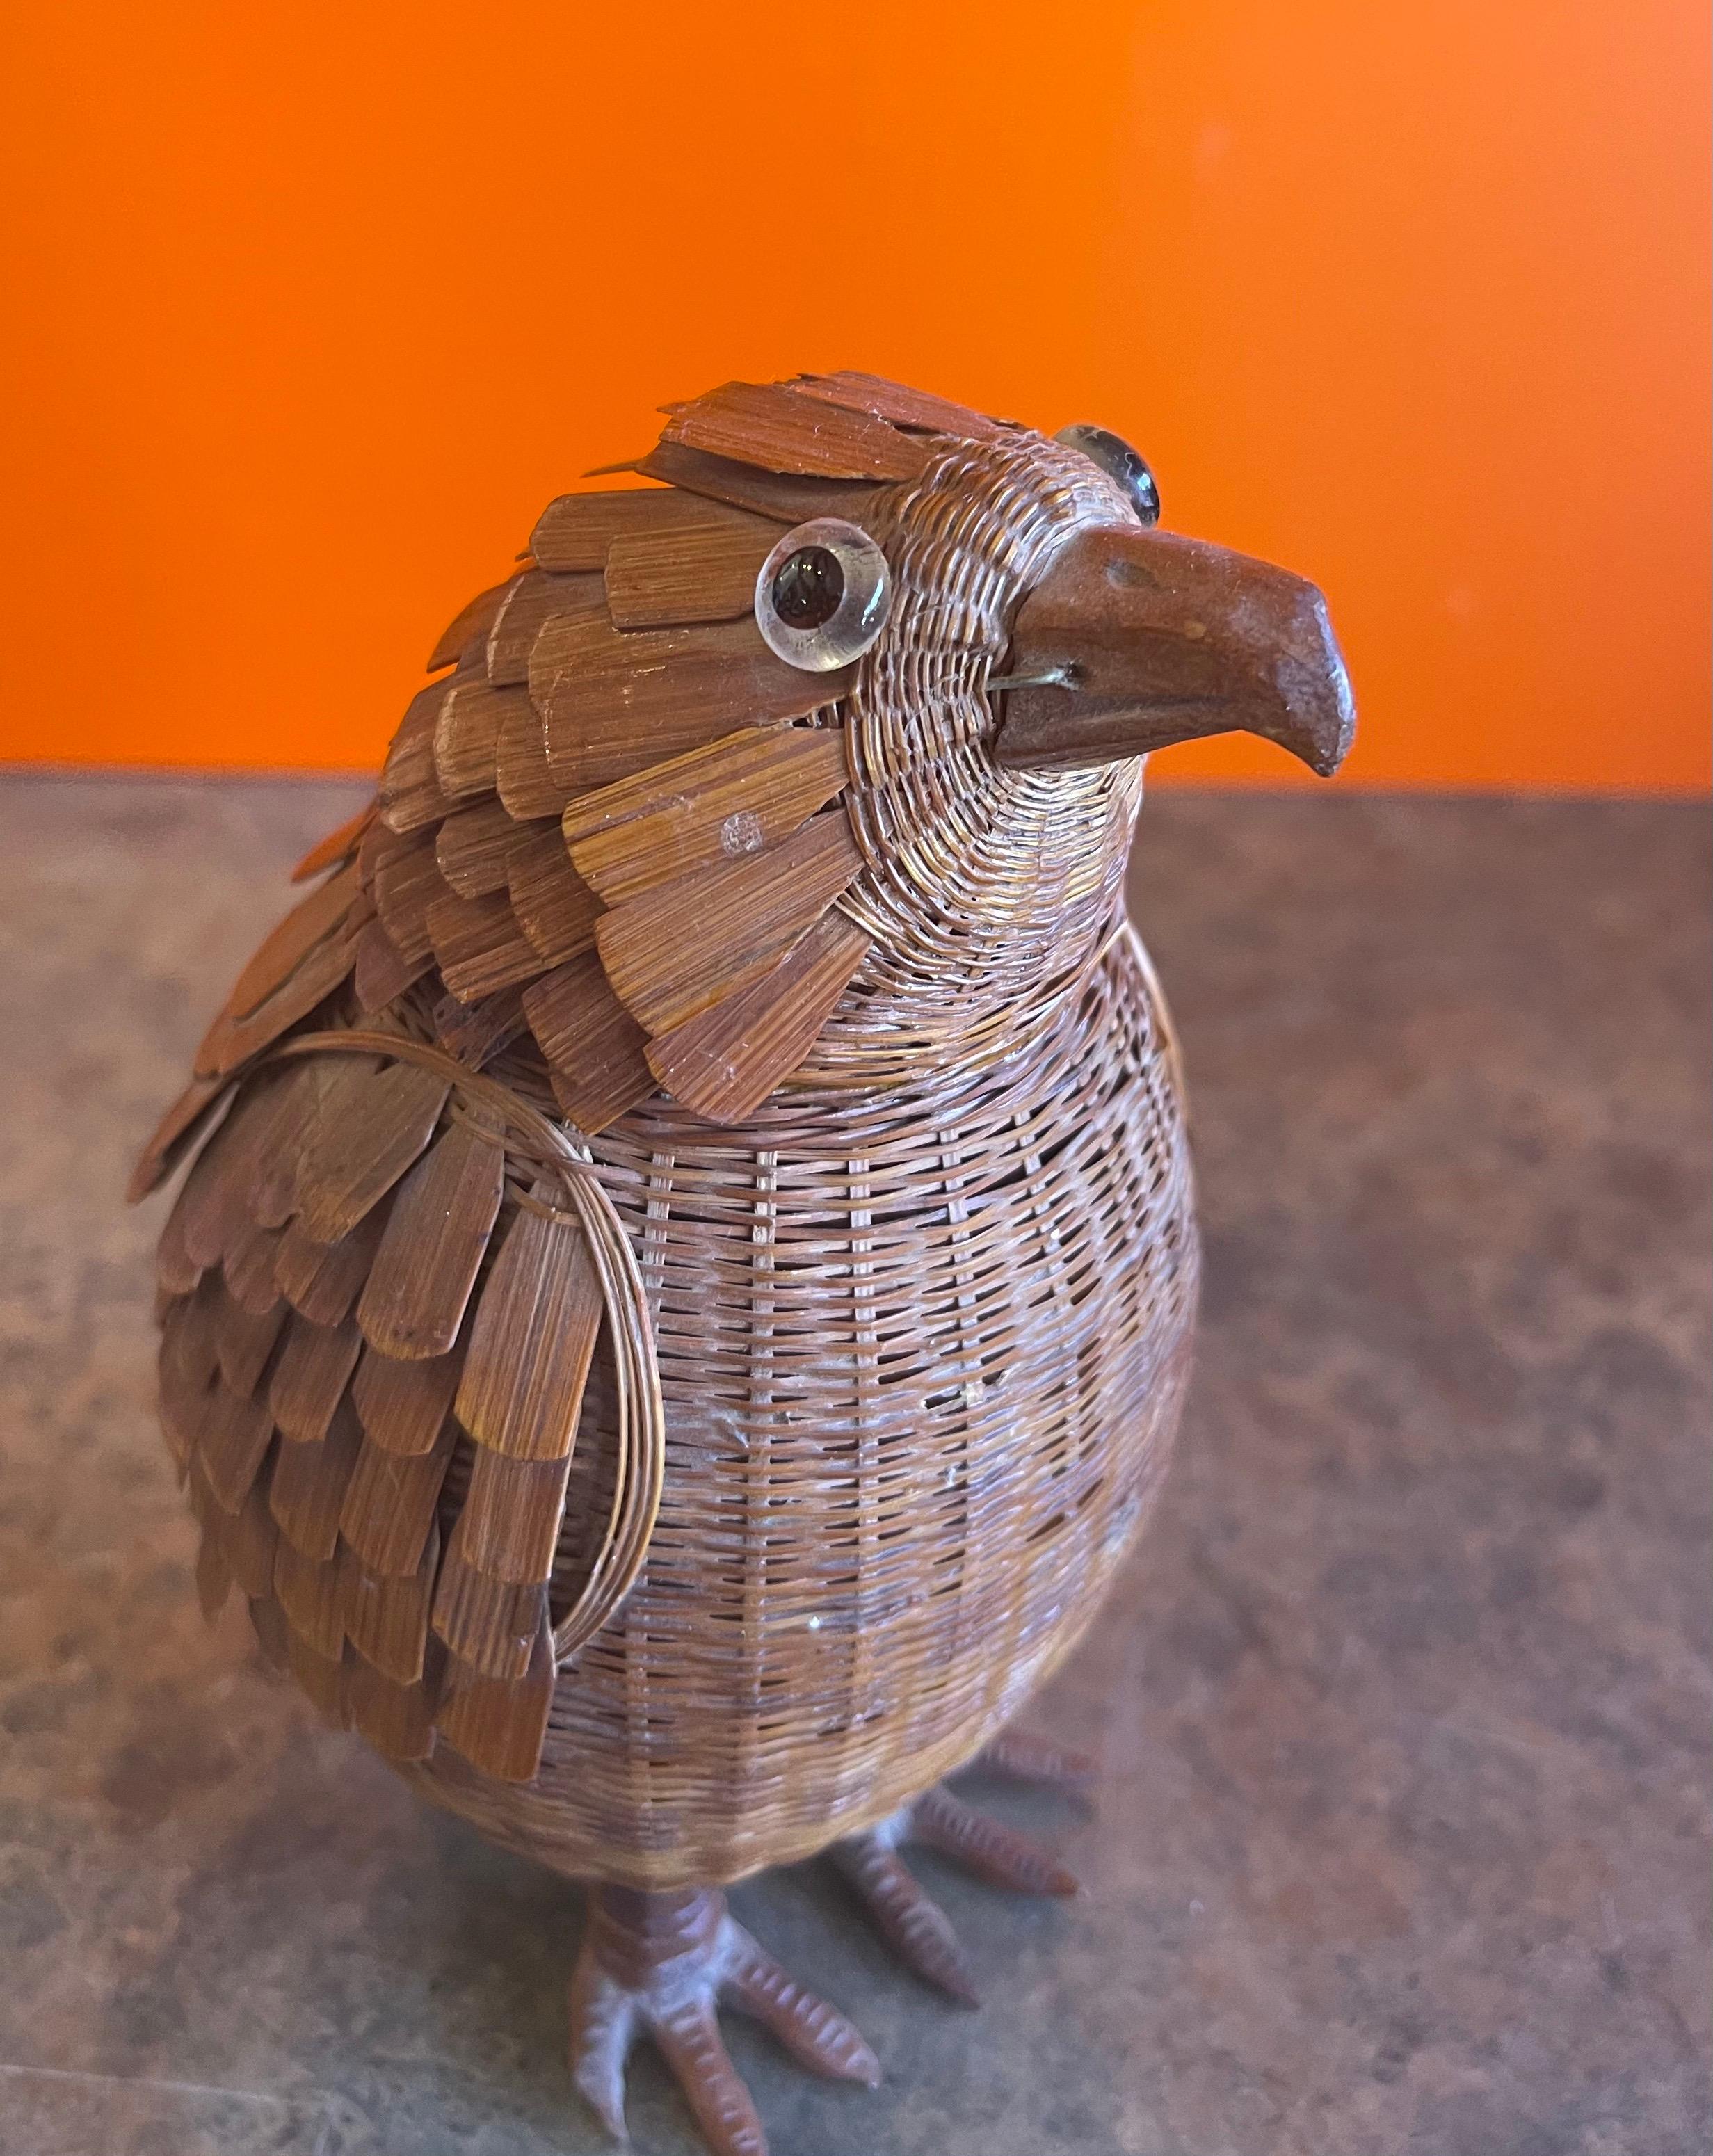 A very rare Chinese woven wicker bird box with removable lid (head) and glass eyes, circa 1940s. The detail and hand made craftsmanship of the piece is absolutely amazing. The piece is in very good vintage condition and measures 4